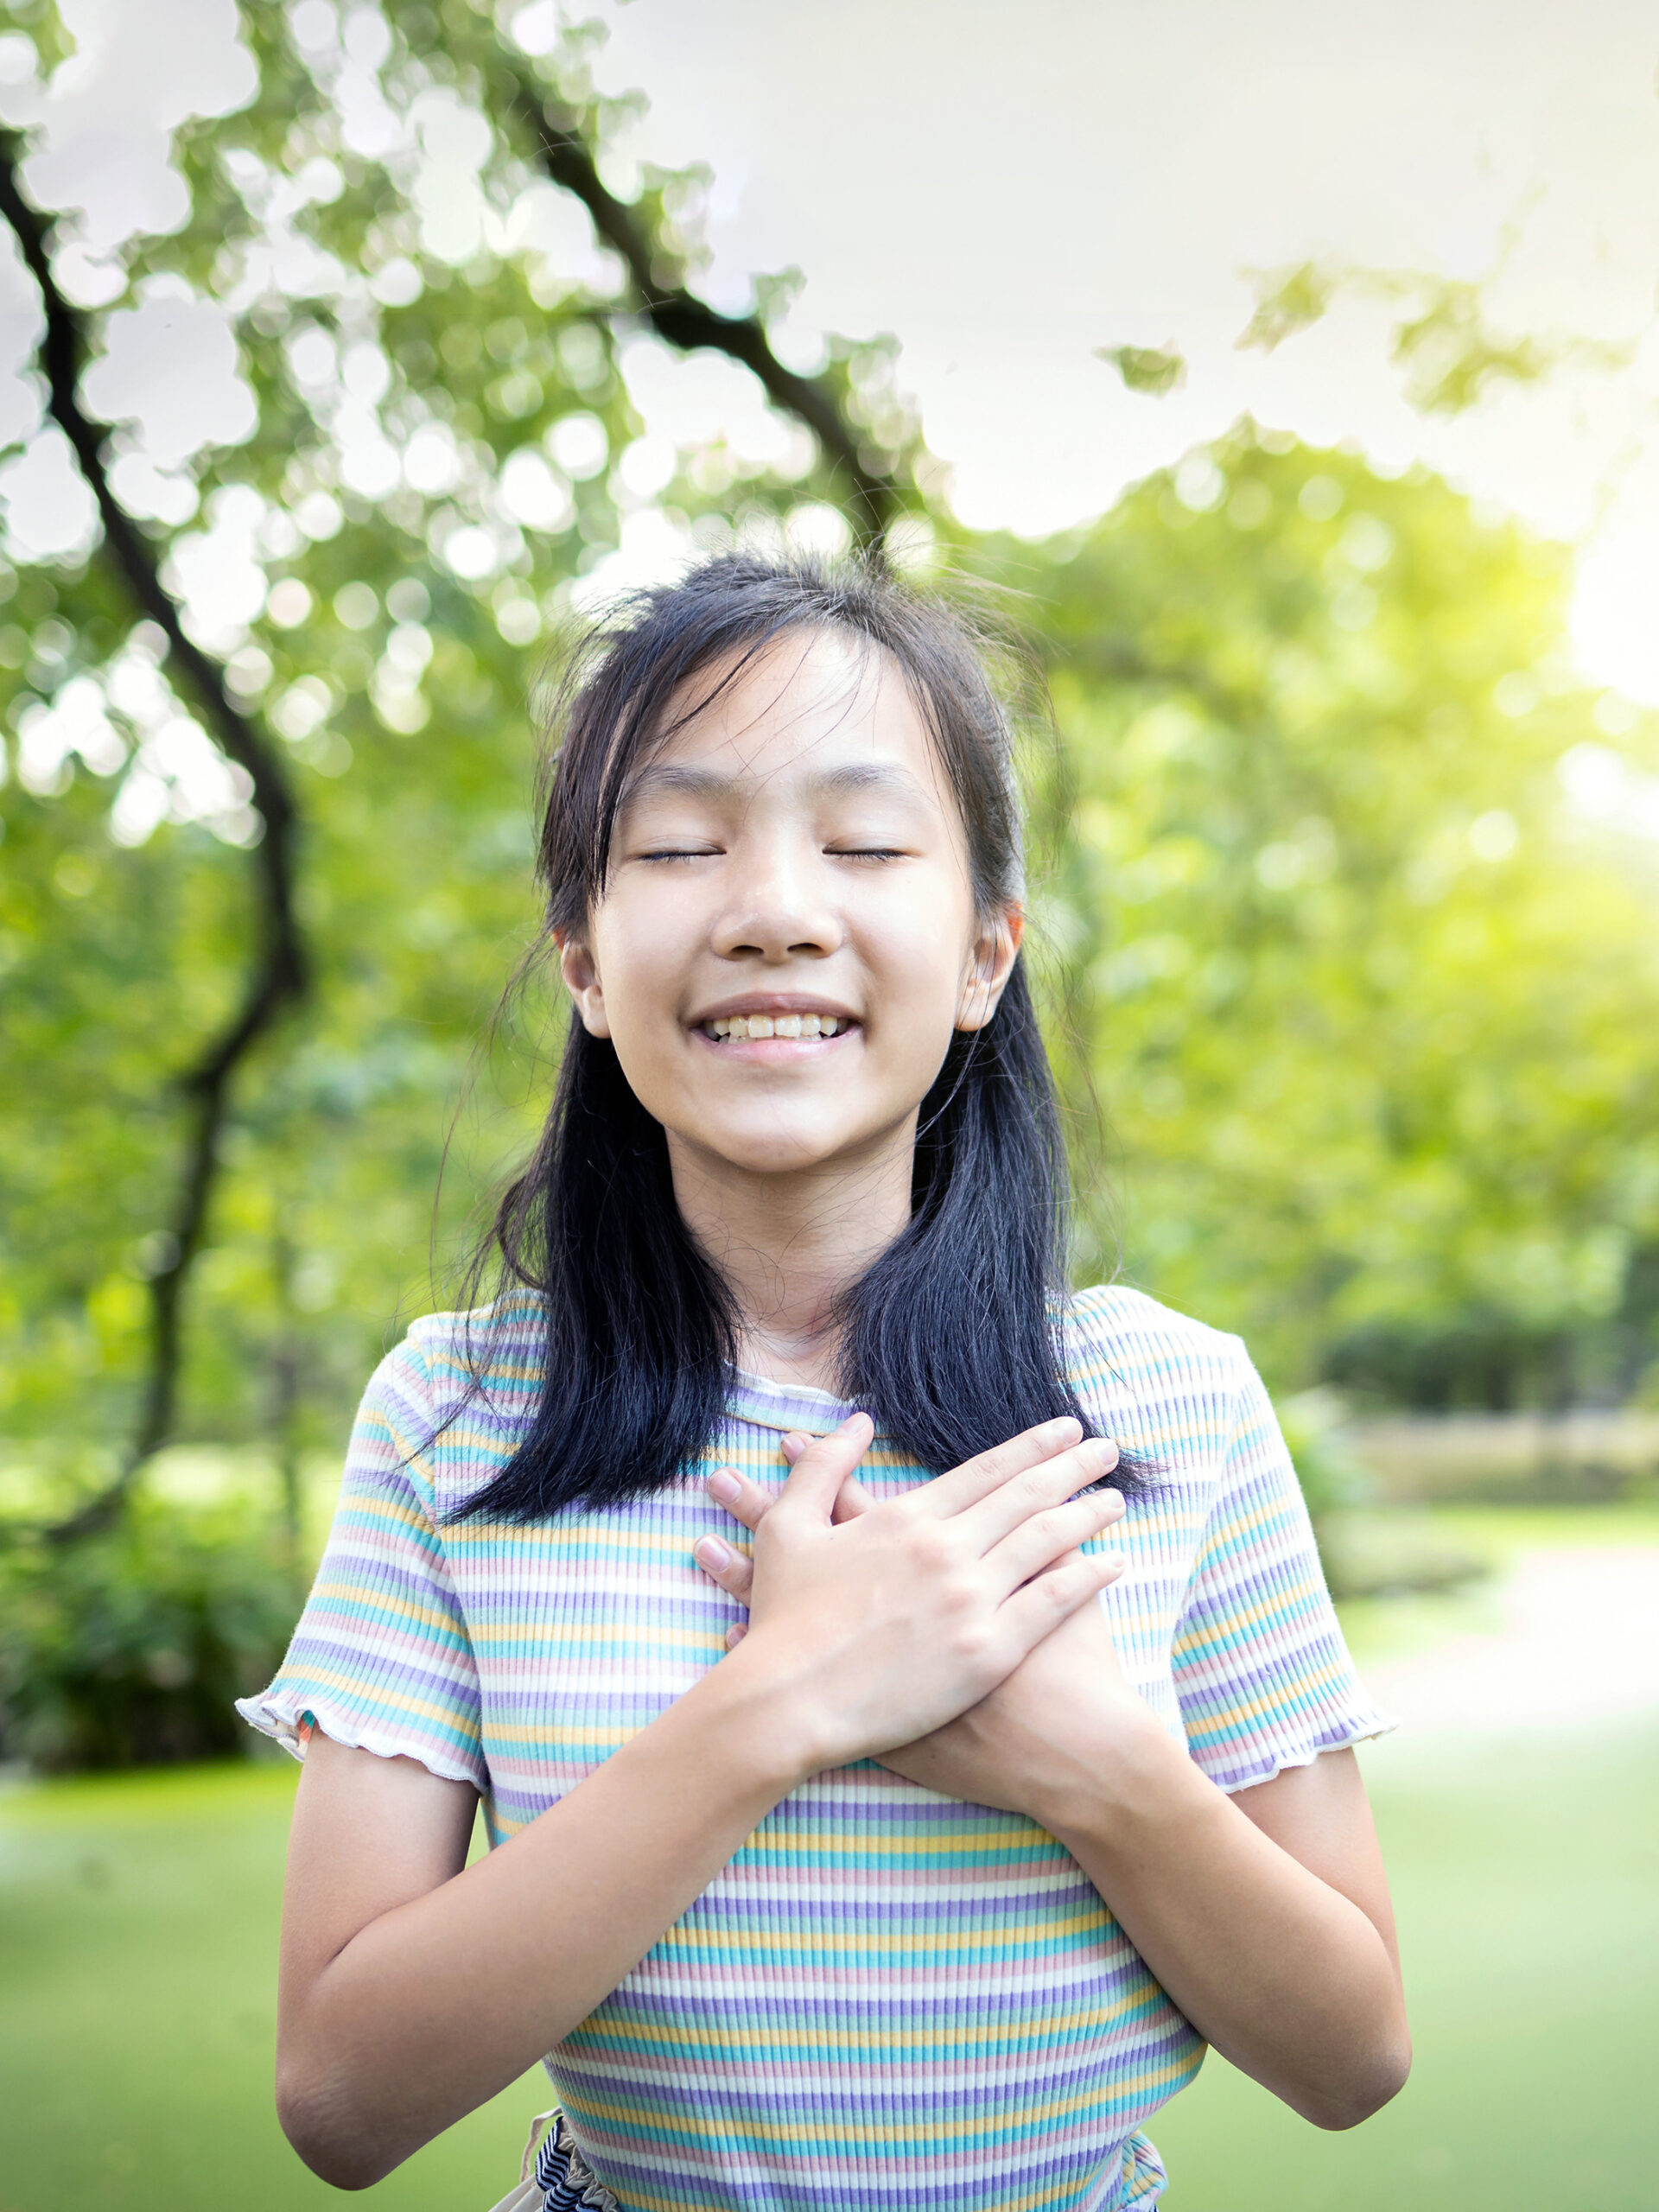 Child closes eyes with hands over heart, looking content - practicing mindfulness with kids